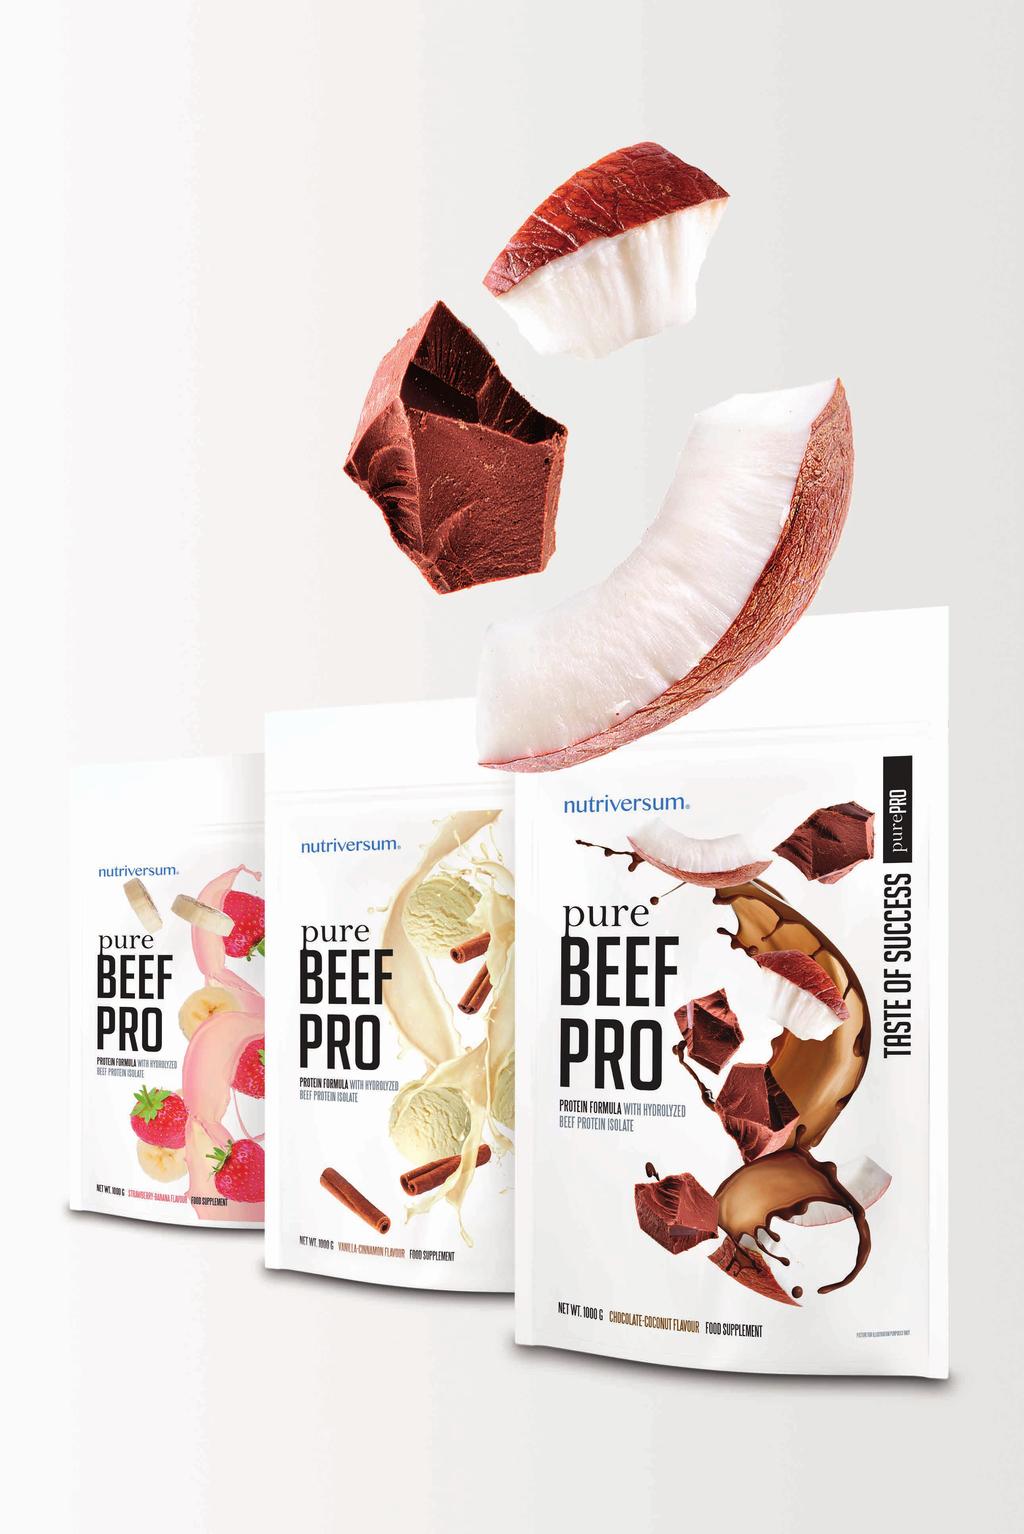 PURE BEEF PRO 80% protein content beef protein formula. Contains 24 grams of protein per serving, consisting of hydrolyzed beef protein formula and whey protein concentrate.